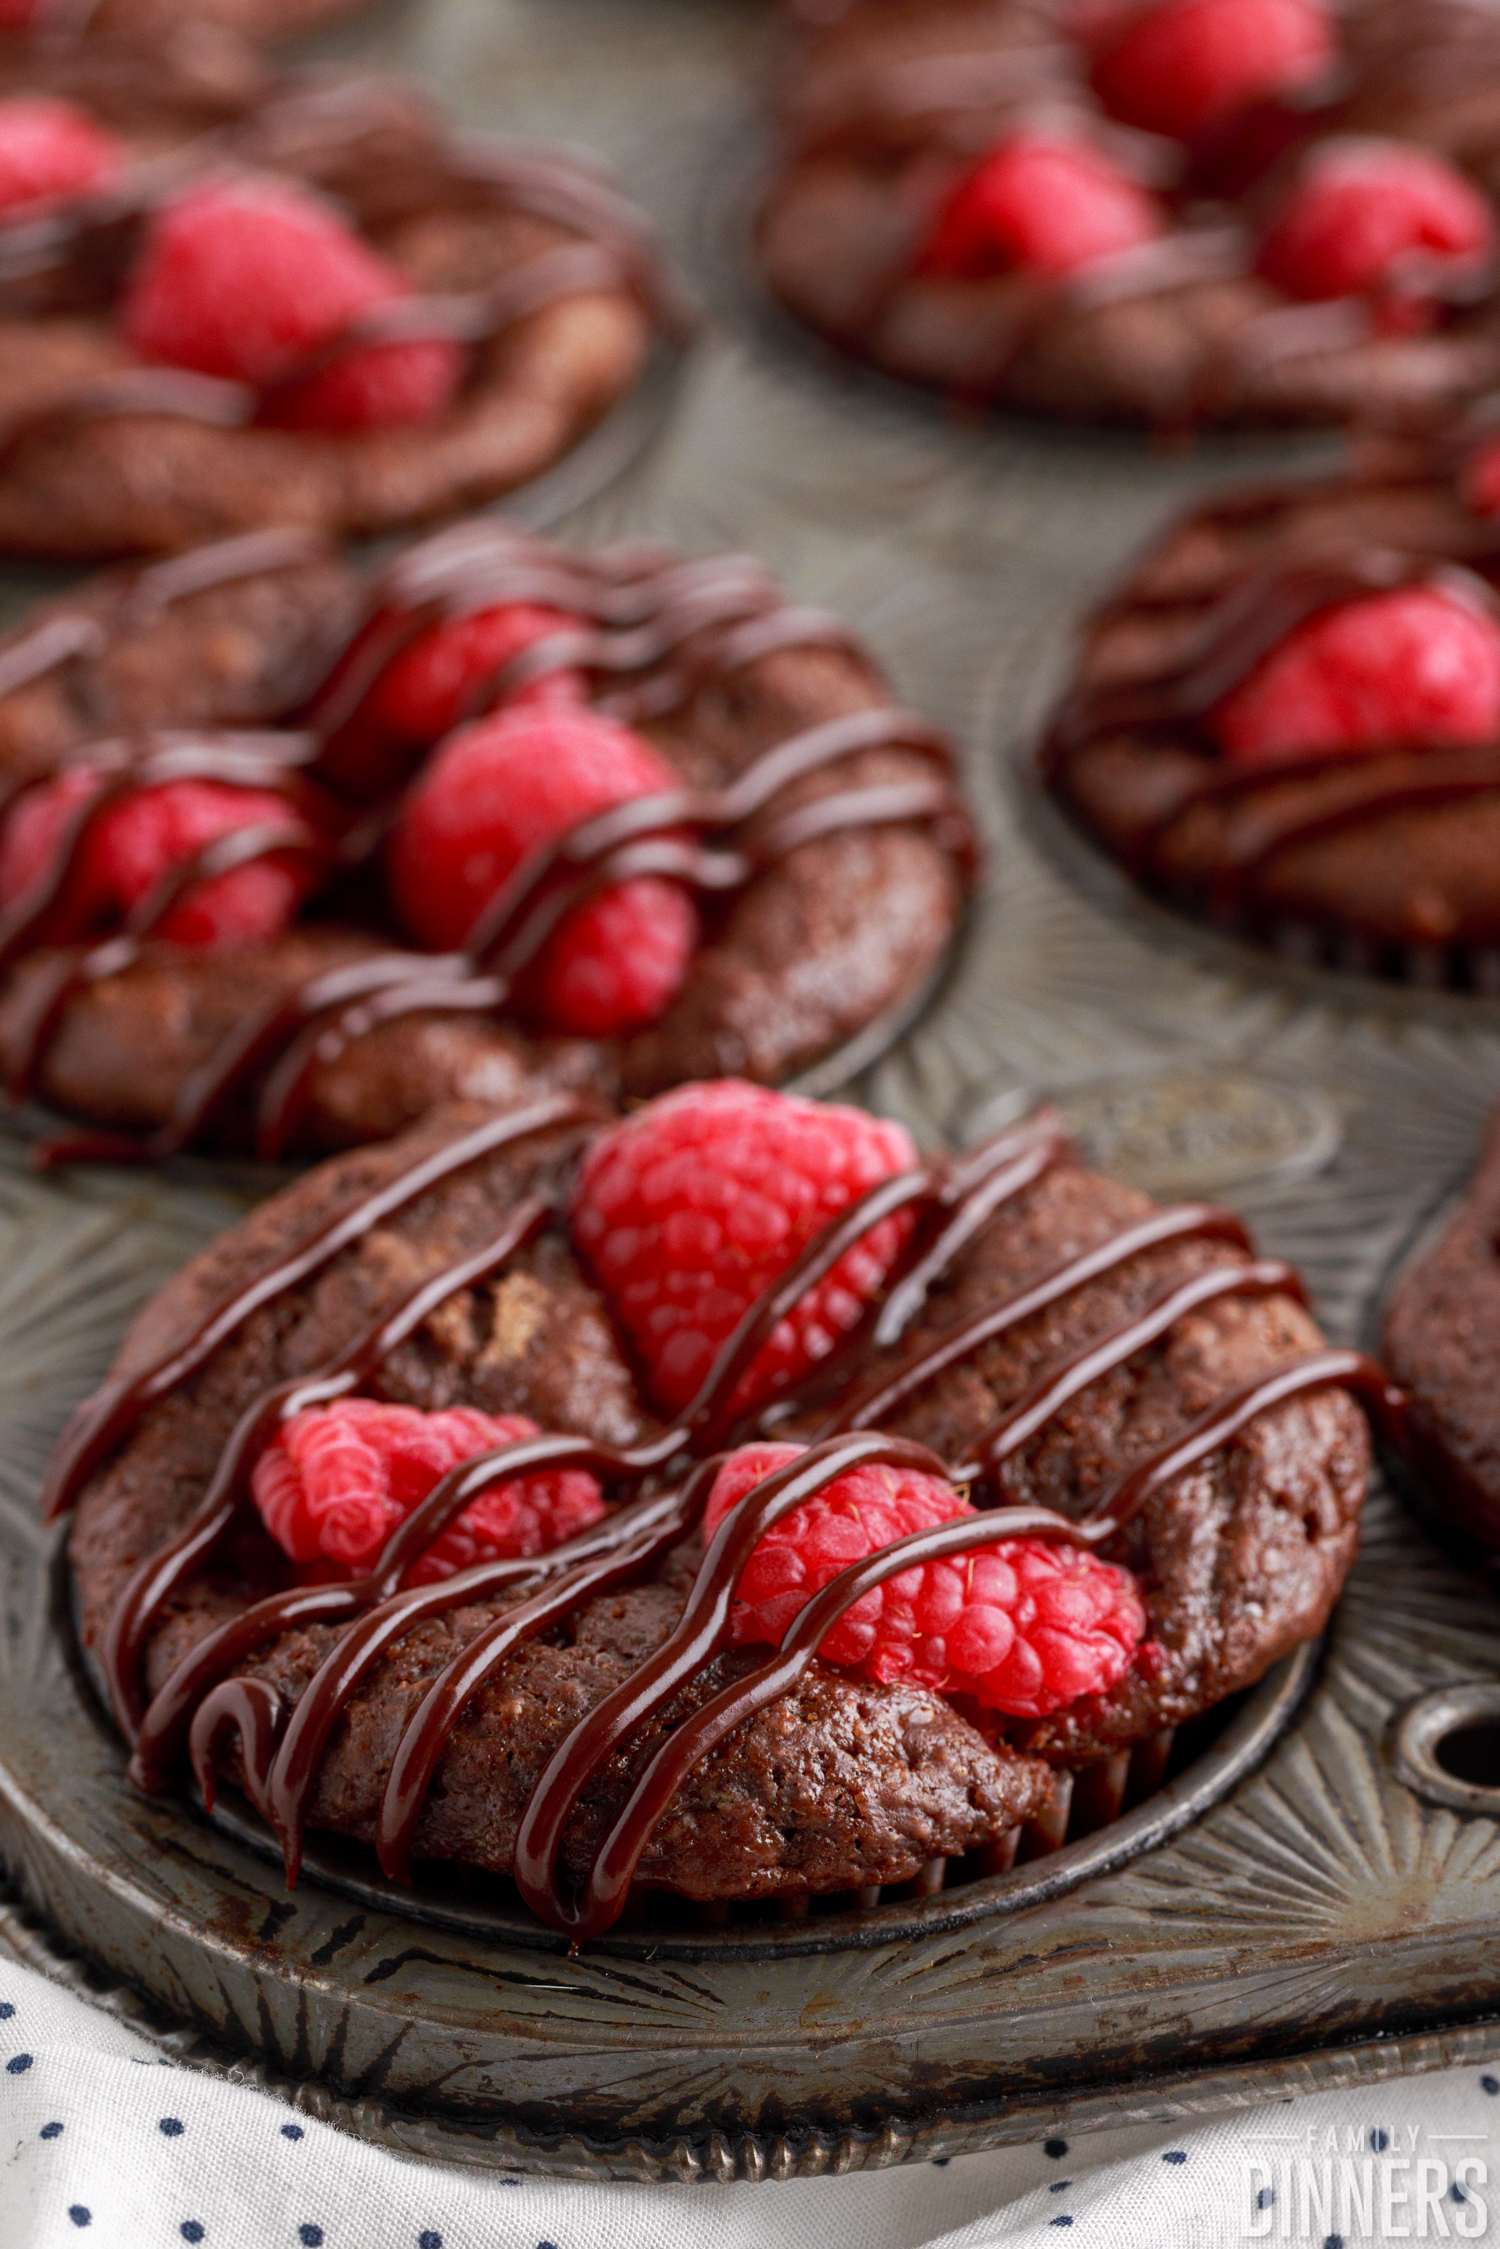 Chocolate muffins in a tin with raspberry and ganache drizzle.